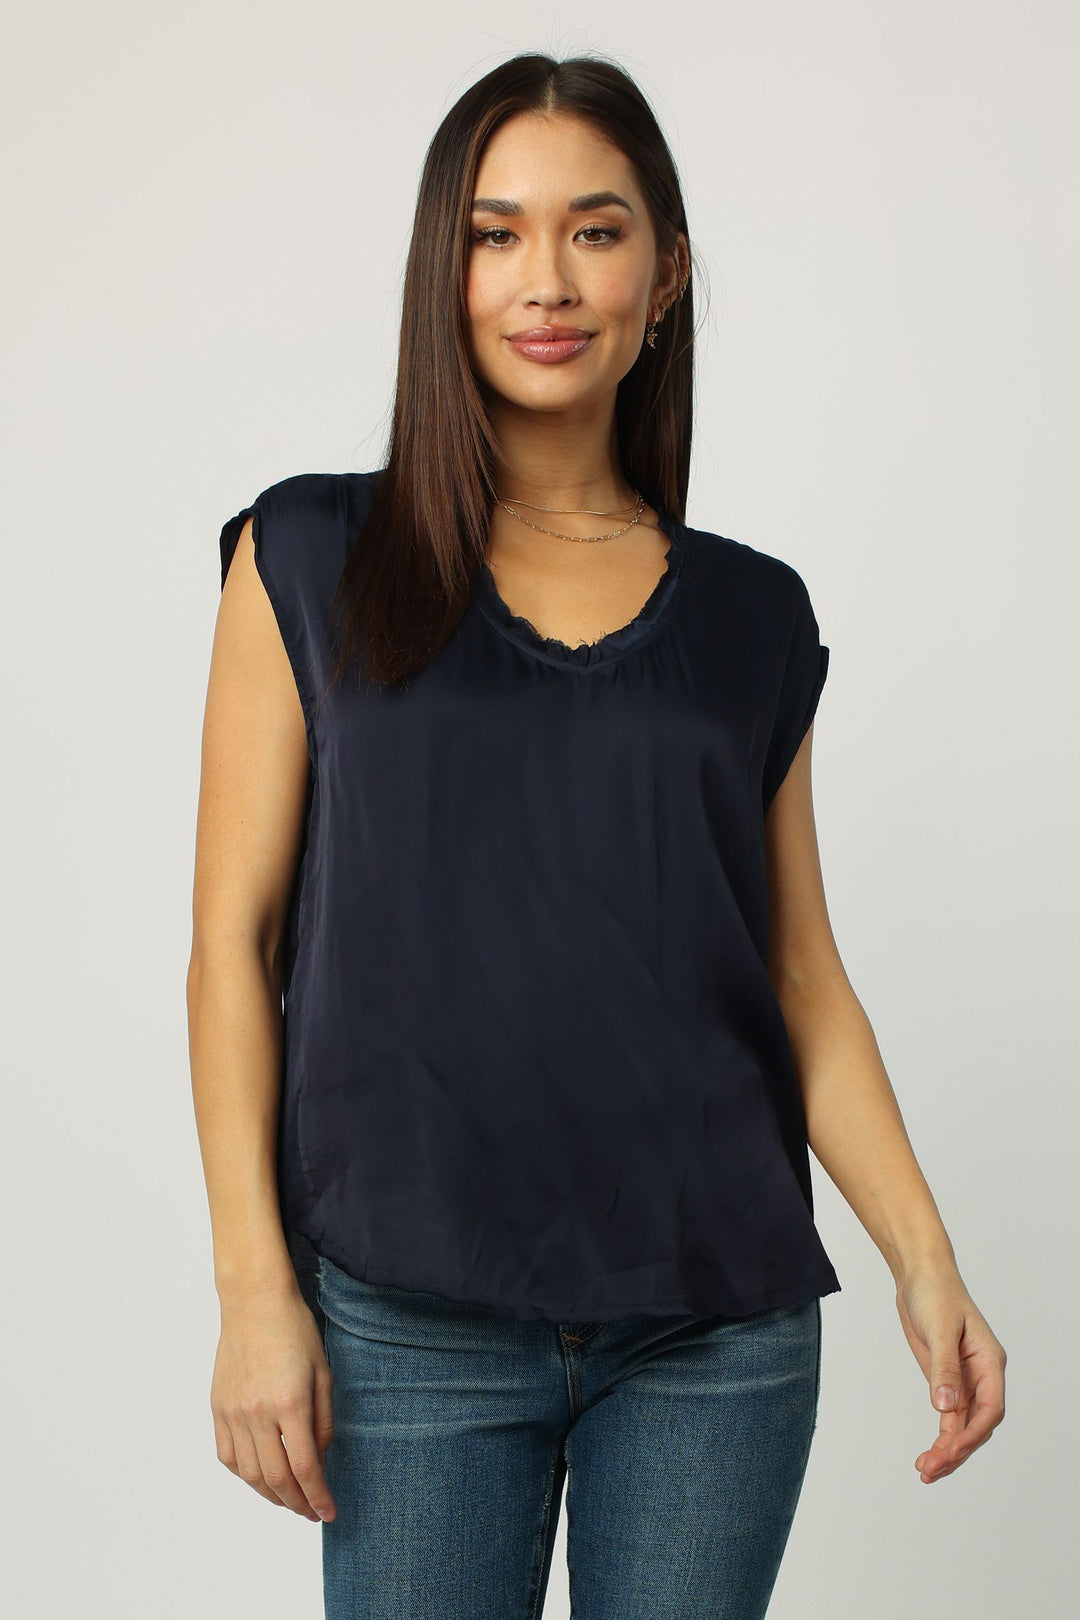 YANIS V-NECK SLEEVELESS TOP - NIGHT SKY - Kingfisher Road - Online Boutique